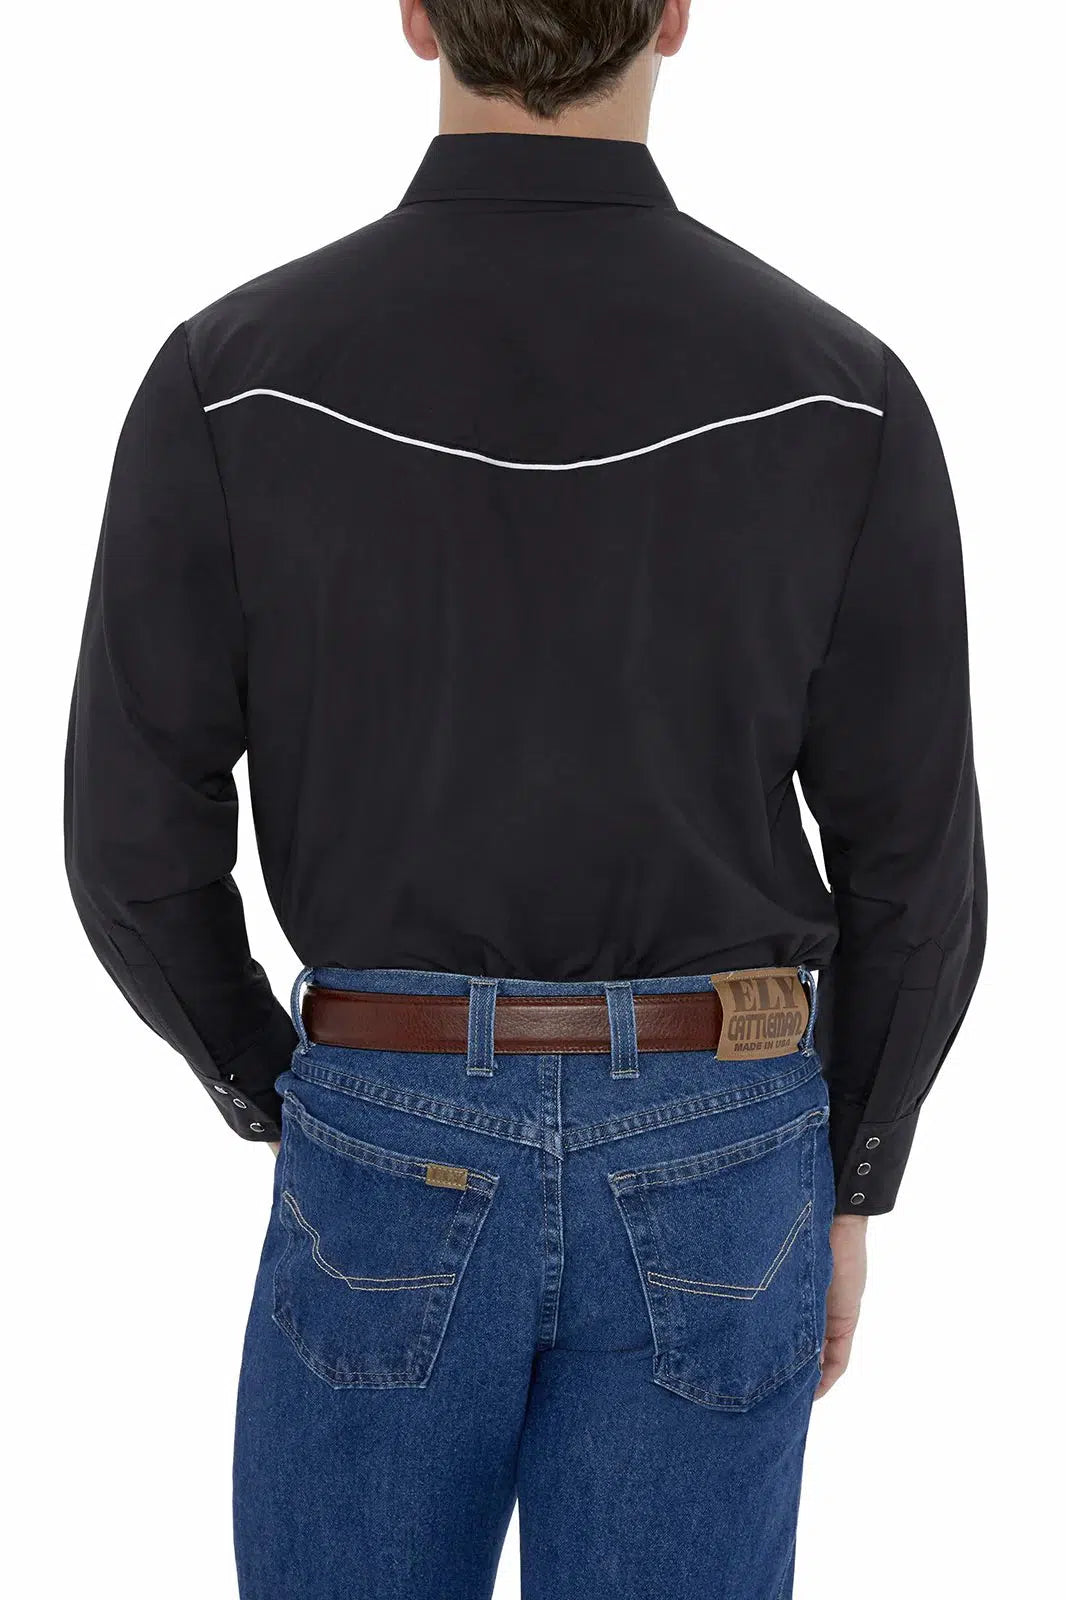 The back of a man wearing jeans and an ELY Mens Embroidered Eagle Western Shirt.